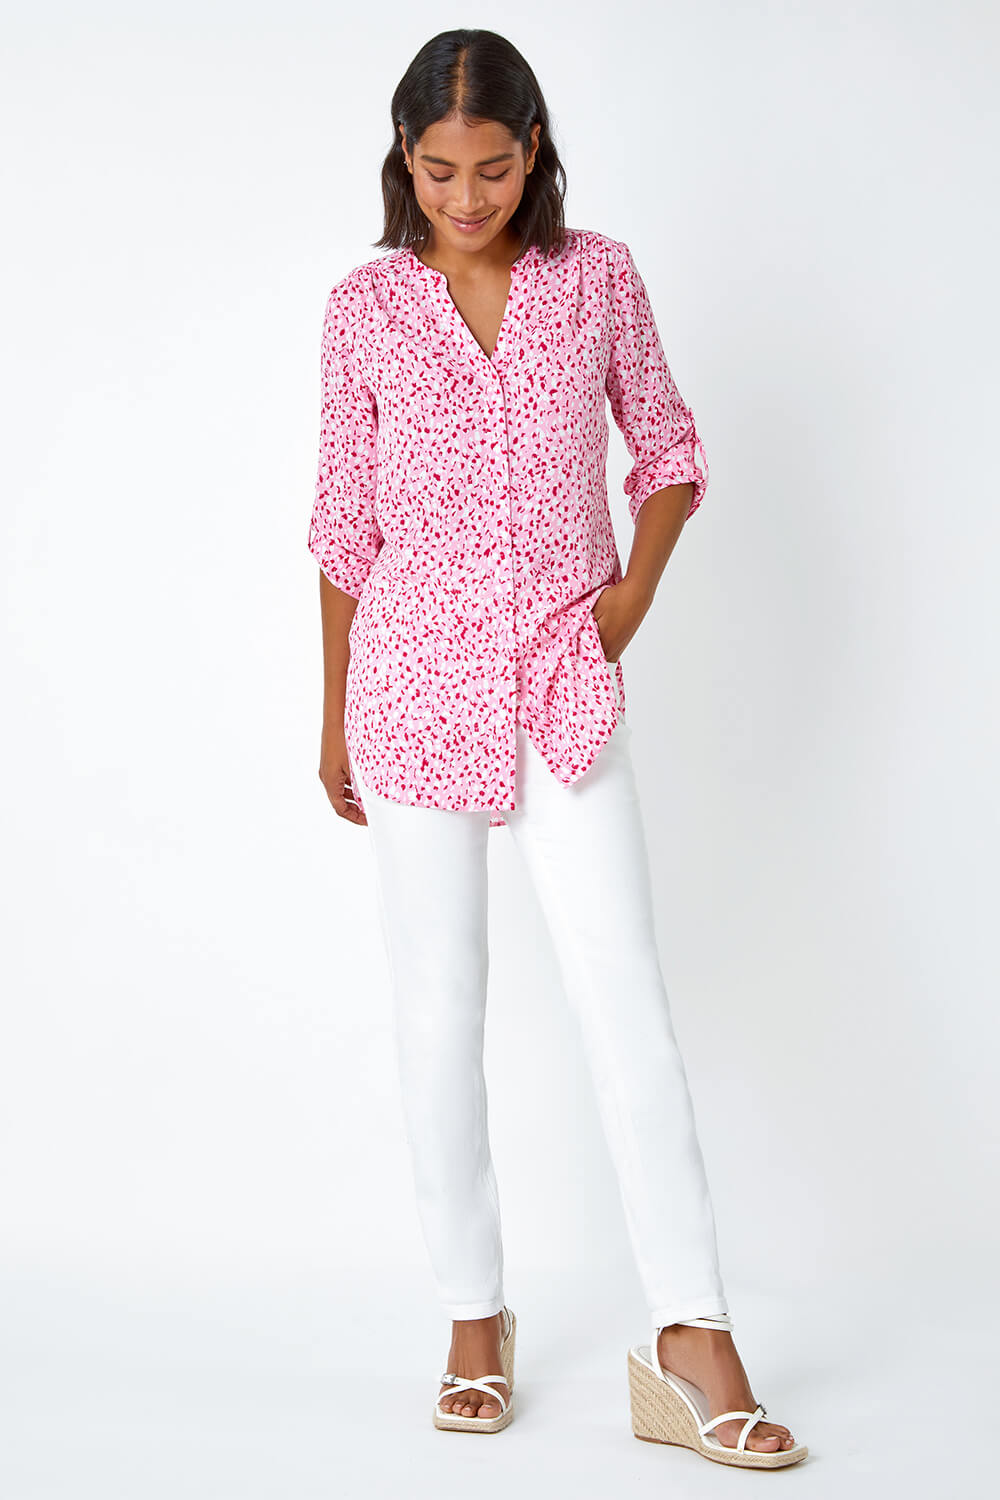 PINK Ditsy Print Button Up Blouse, Image 2 of 5